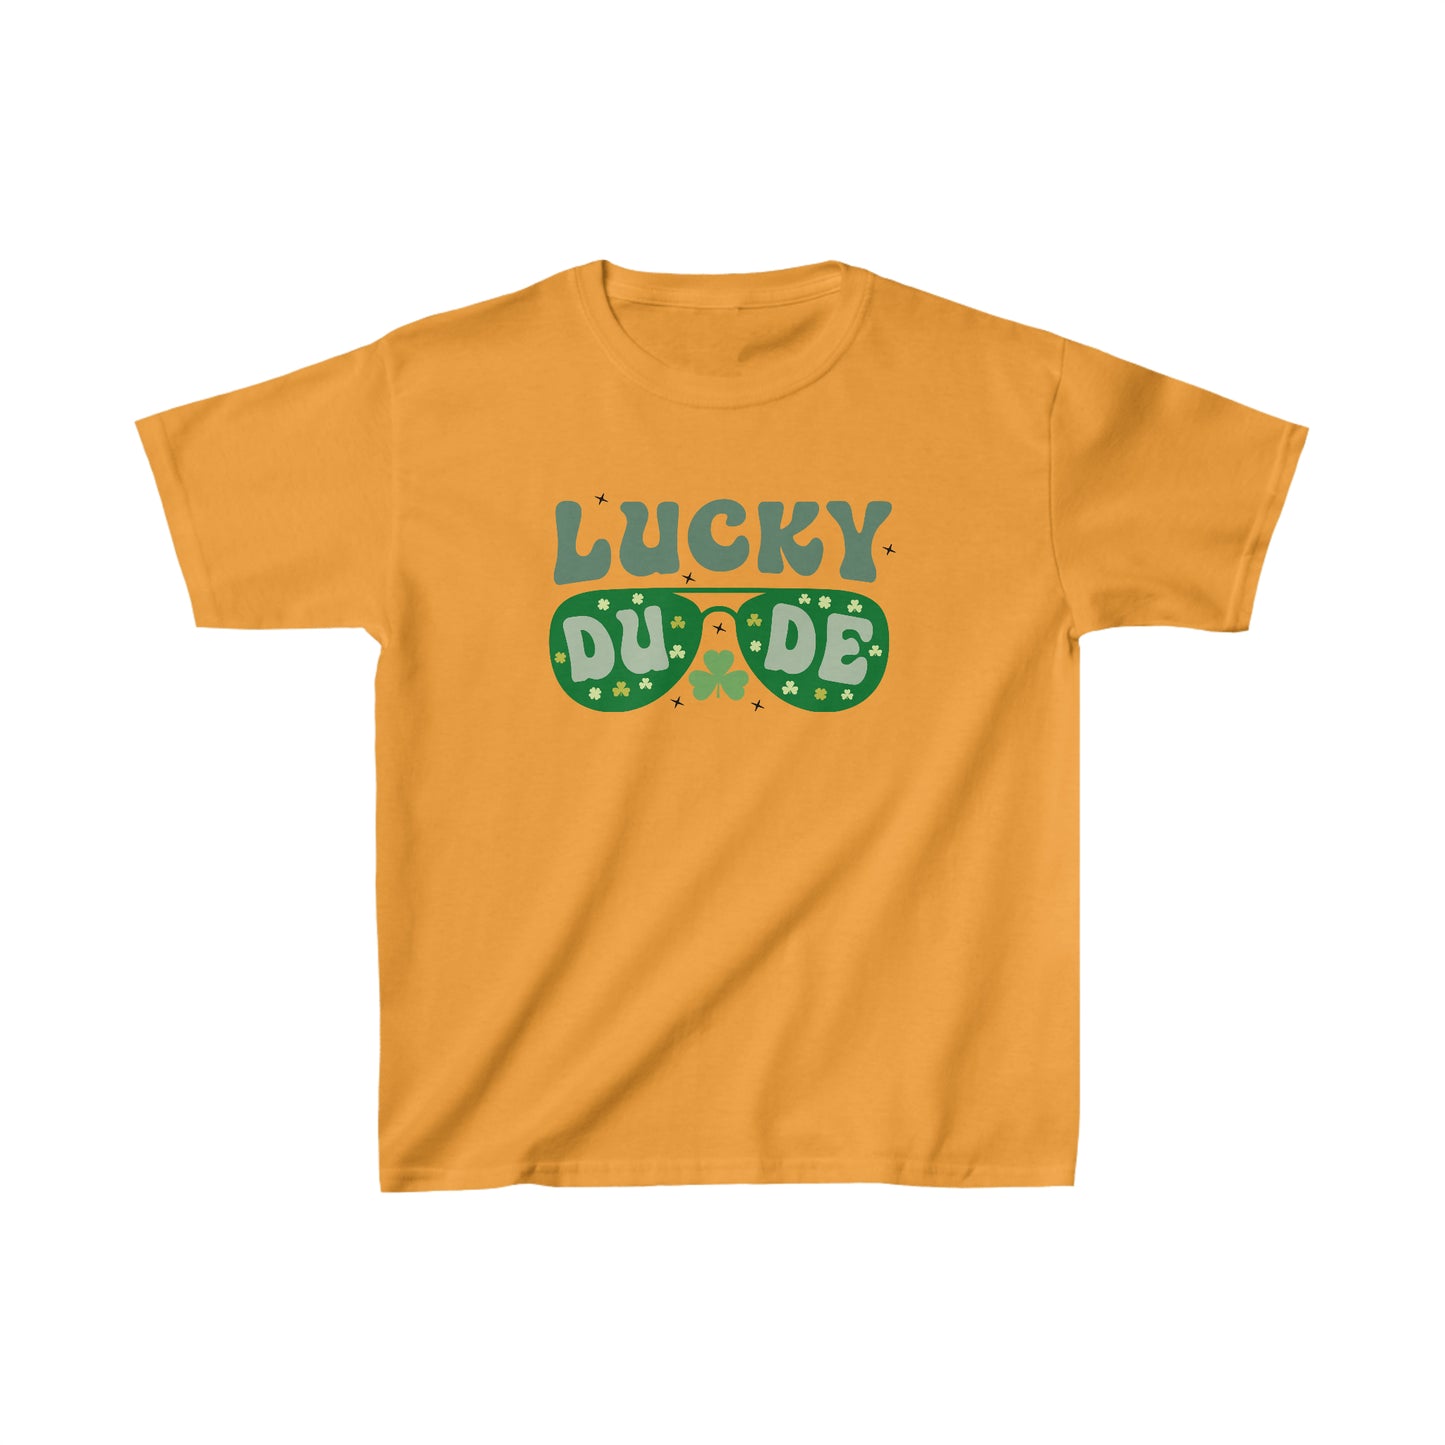 Lucky Dude St. Patrick's Day Kids Tee